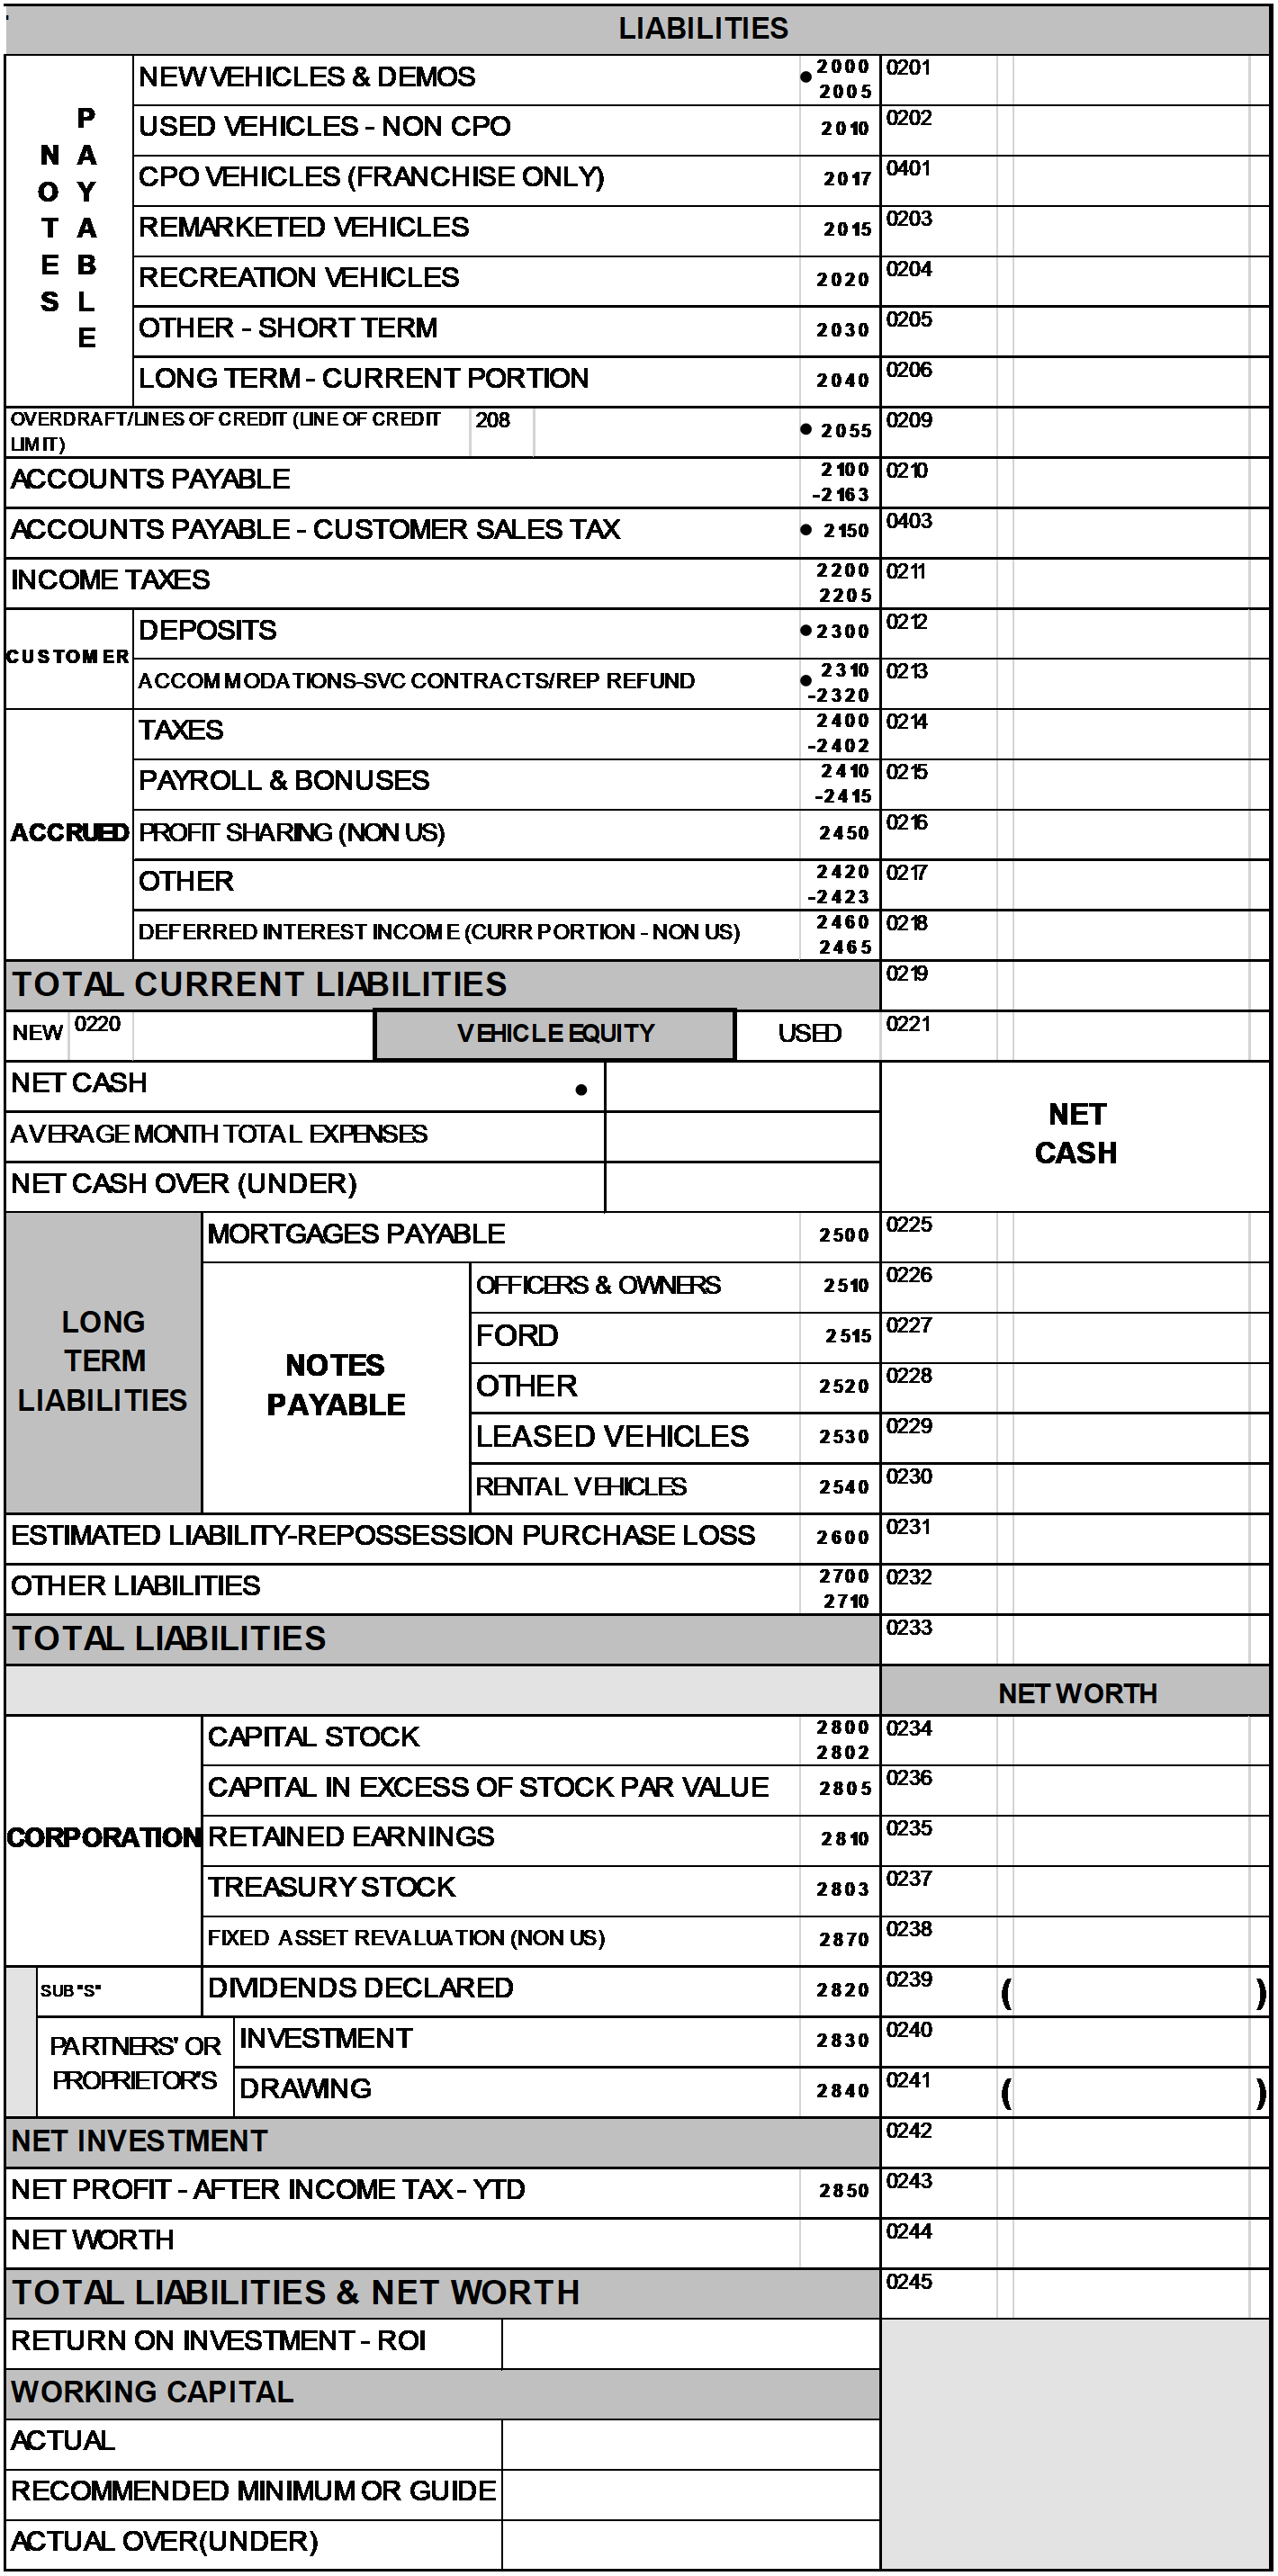 2021 2020 – Page 1 – Liabilities and Net Worth